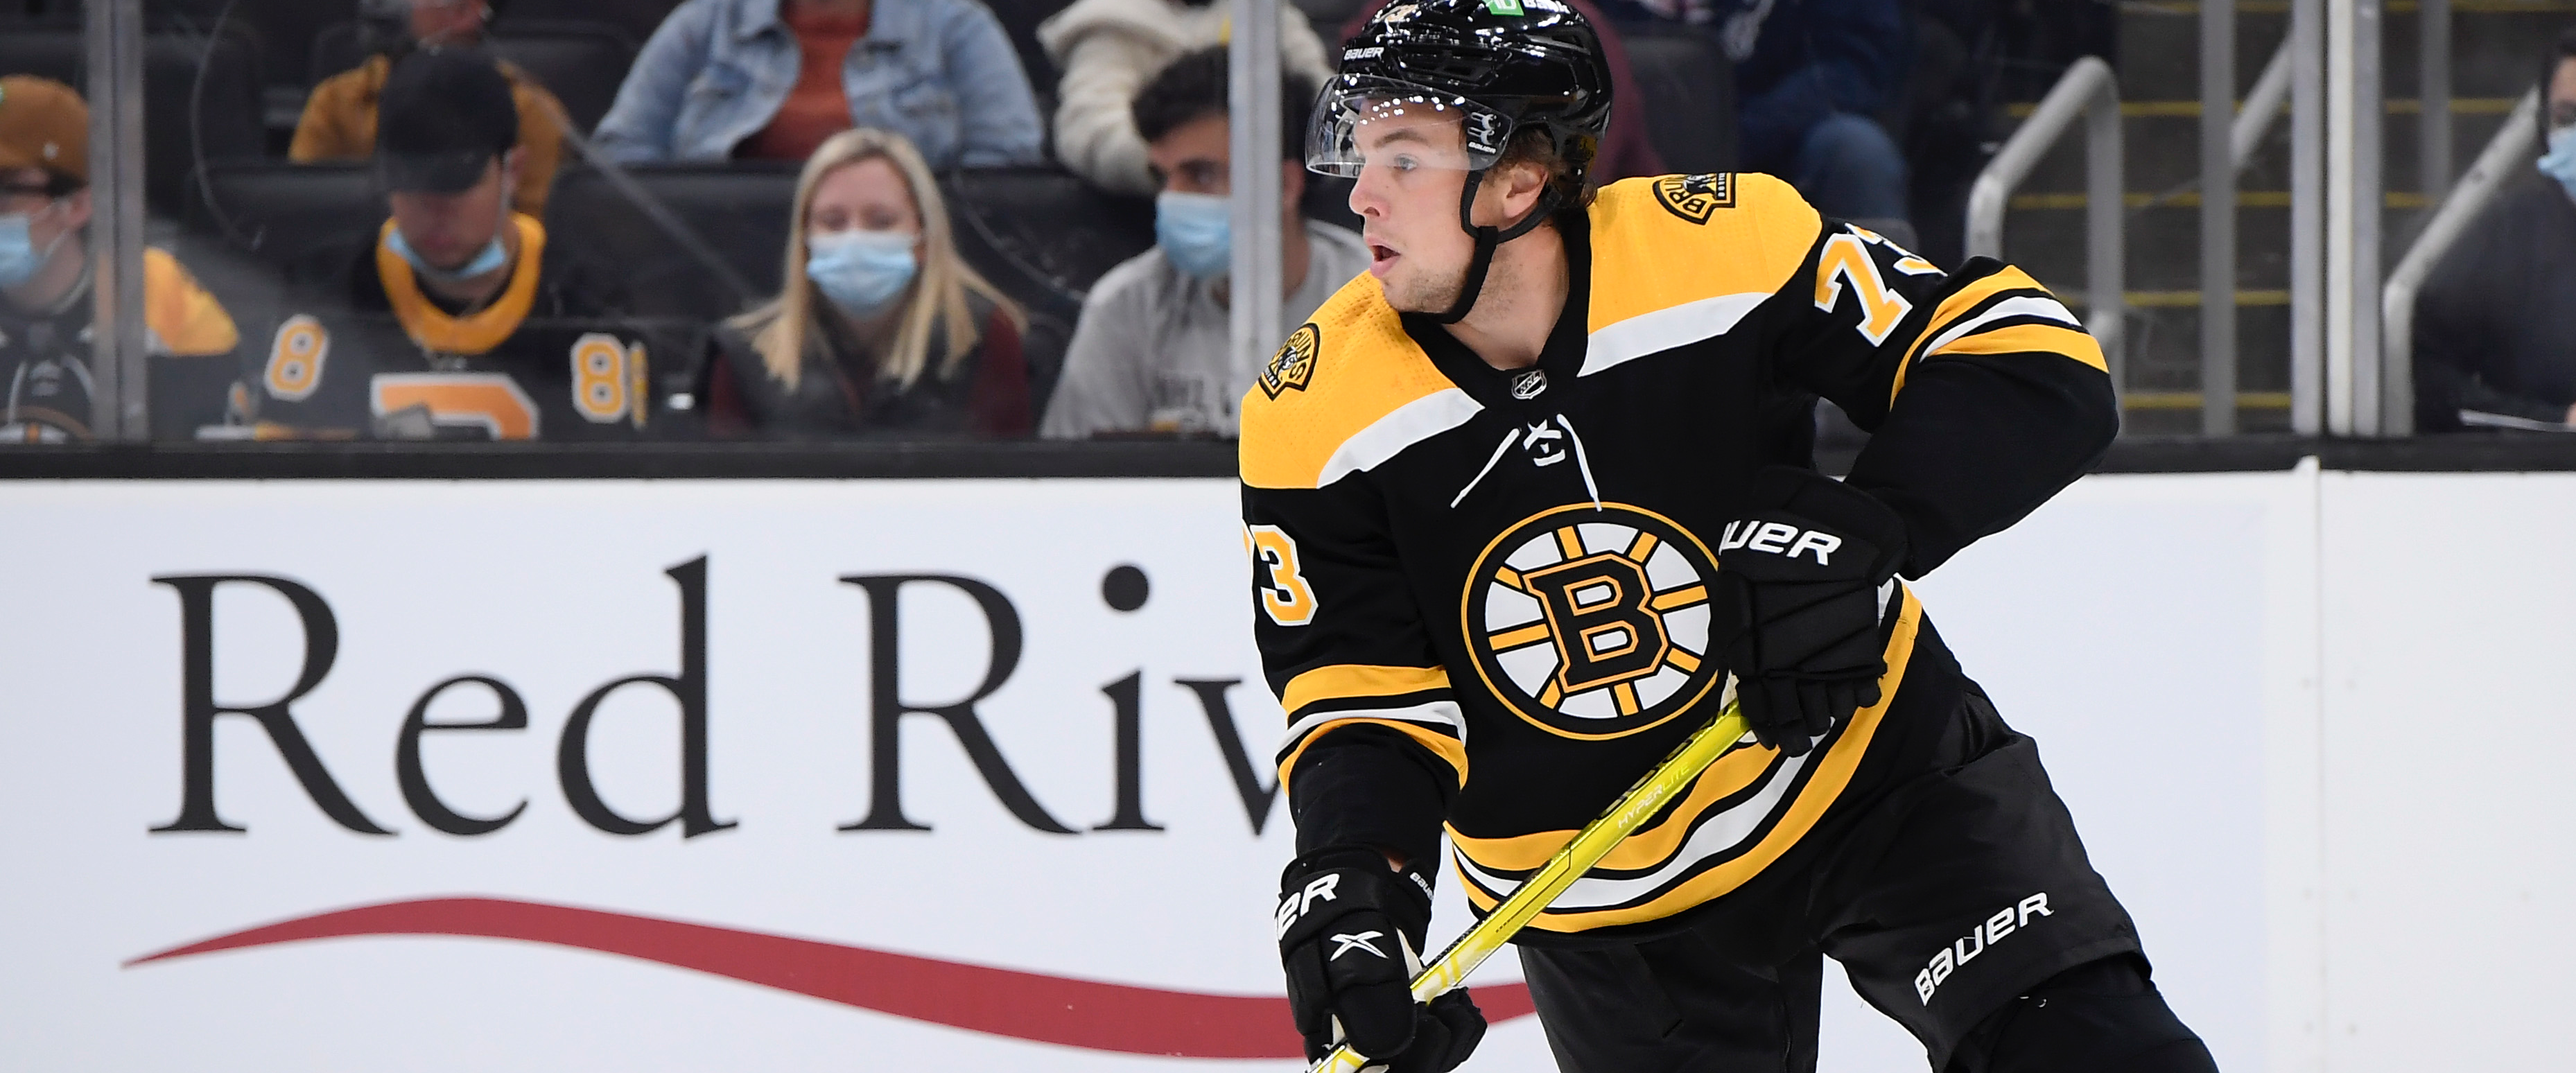 Bruins Had No Choice But To Pay McAvoy